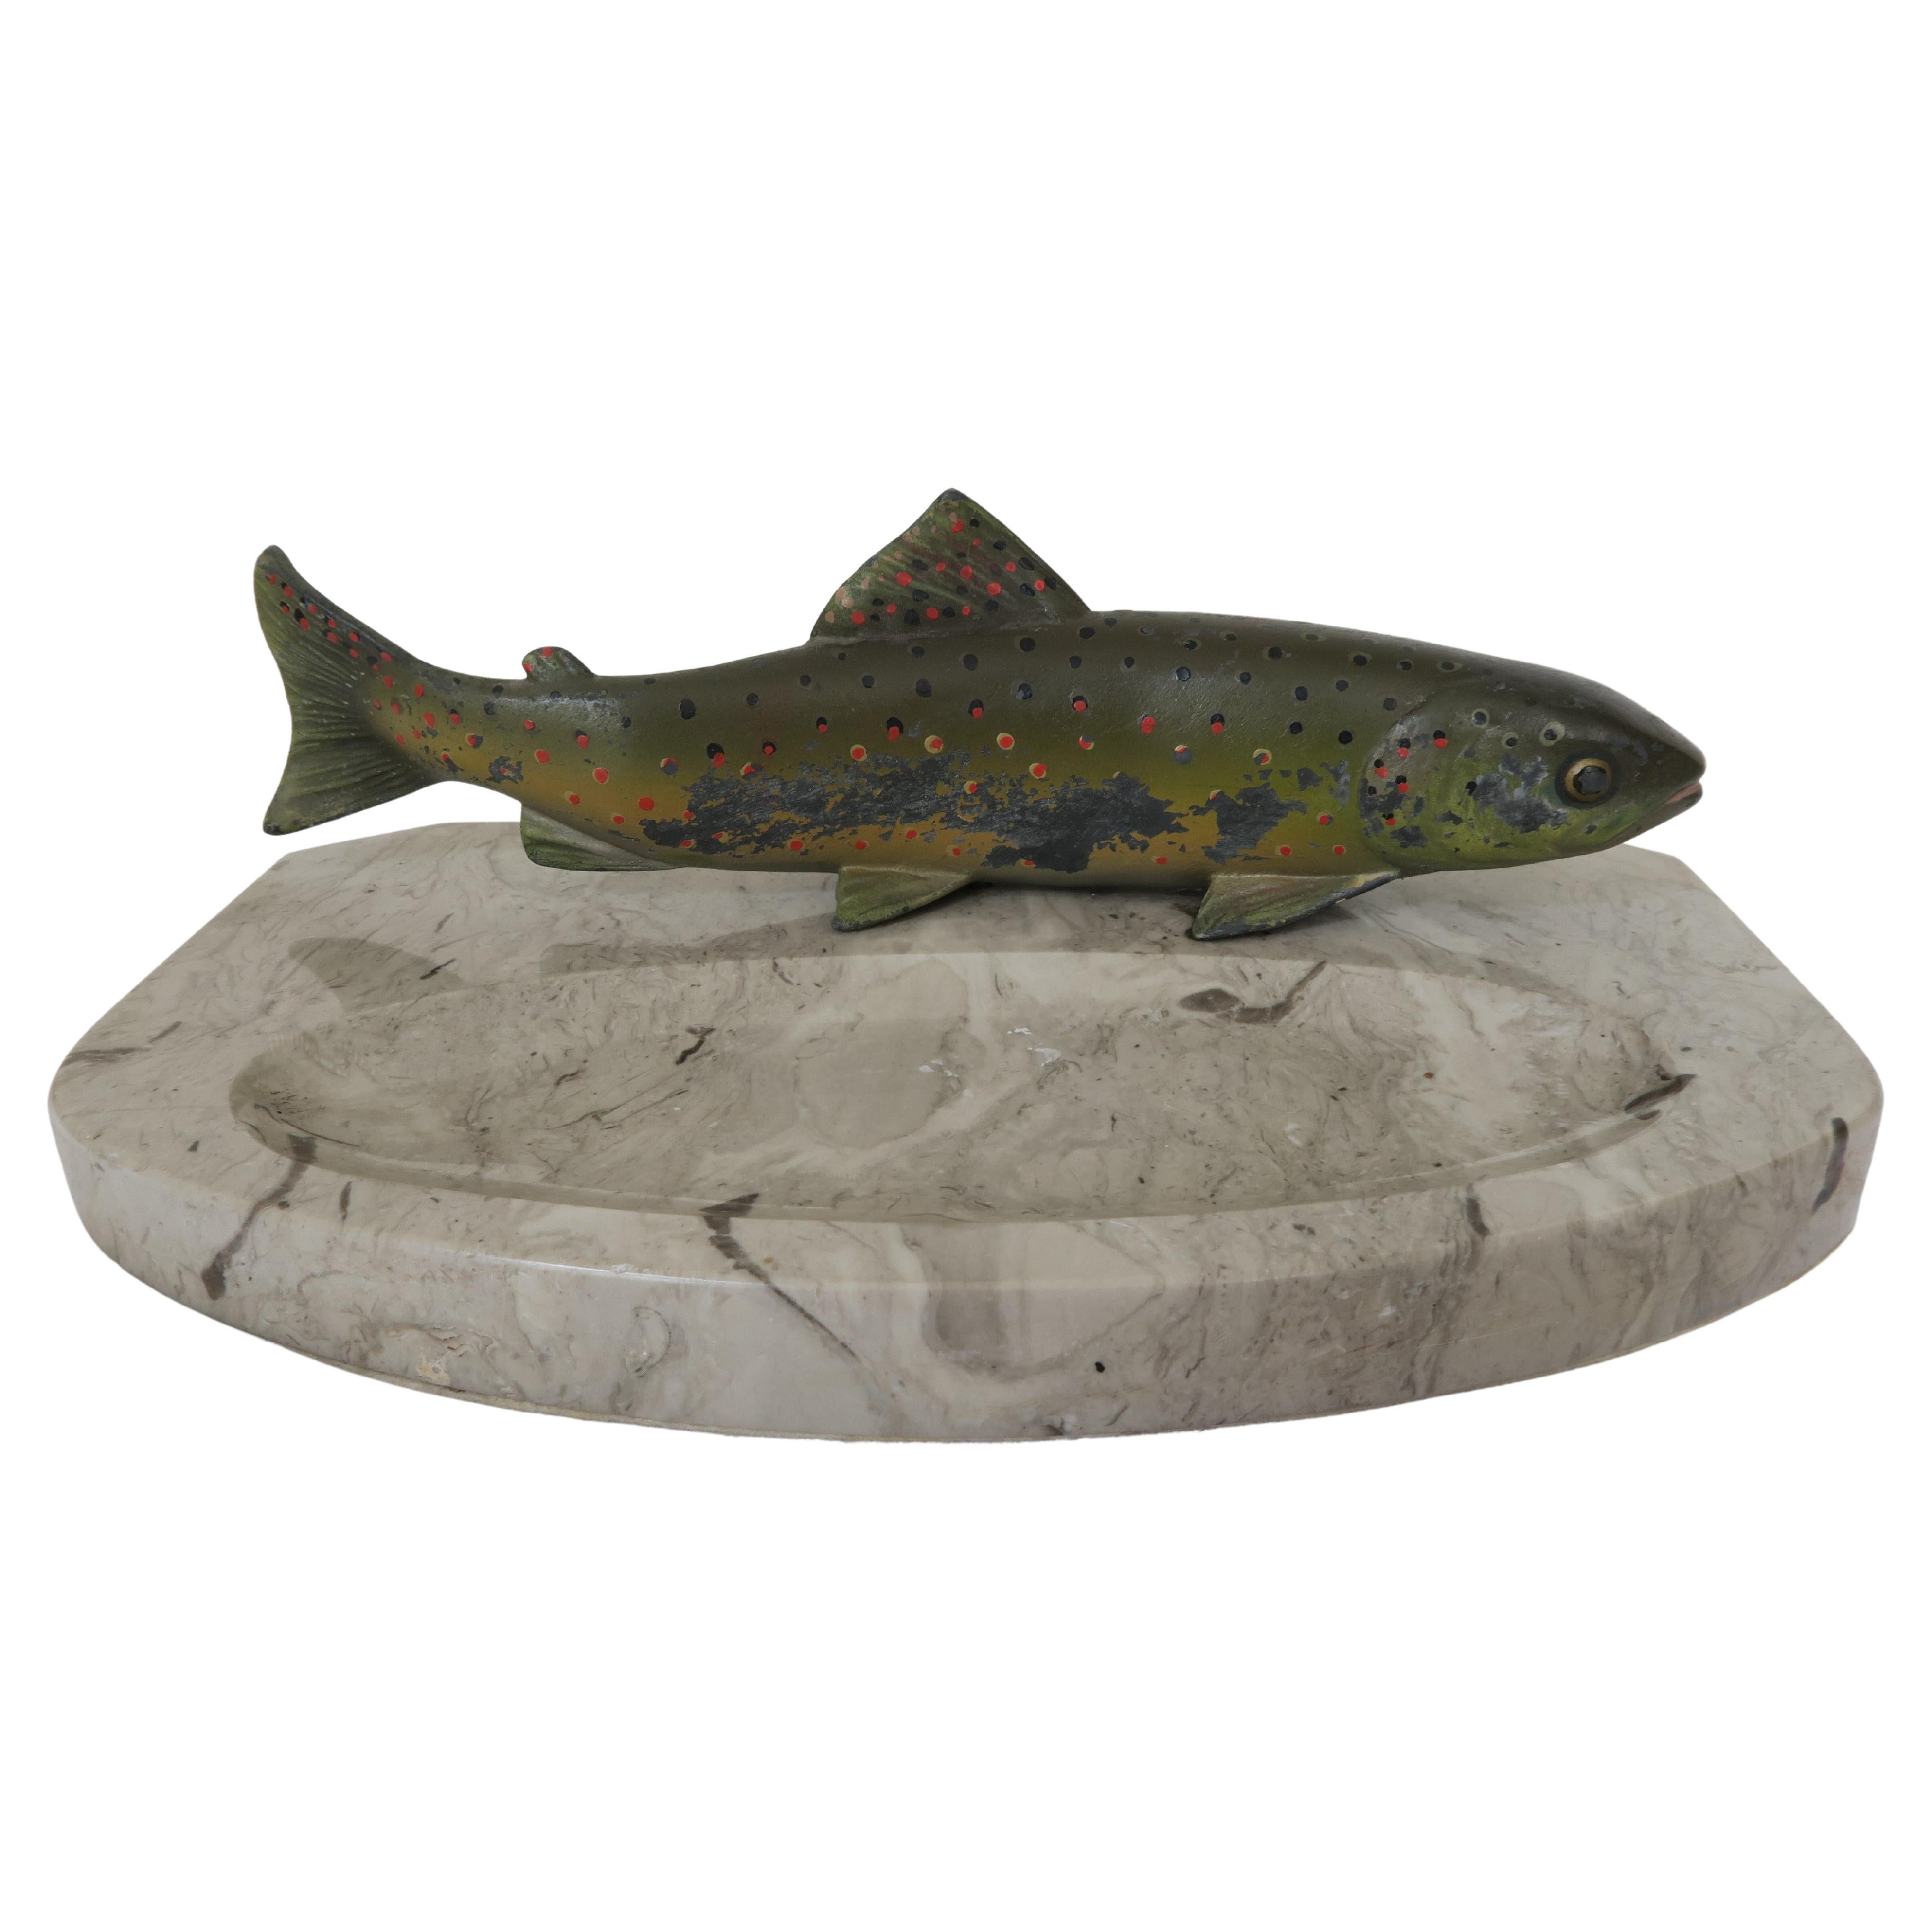 Decorative Bergmann Dish Mde from Lime Stone with Trout Figurine For Sale